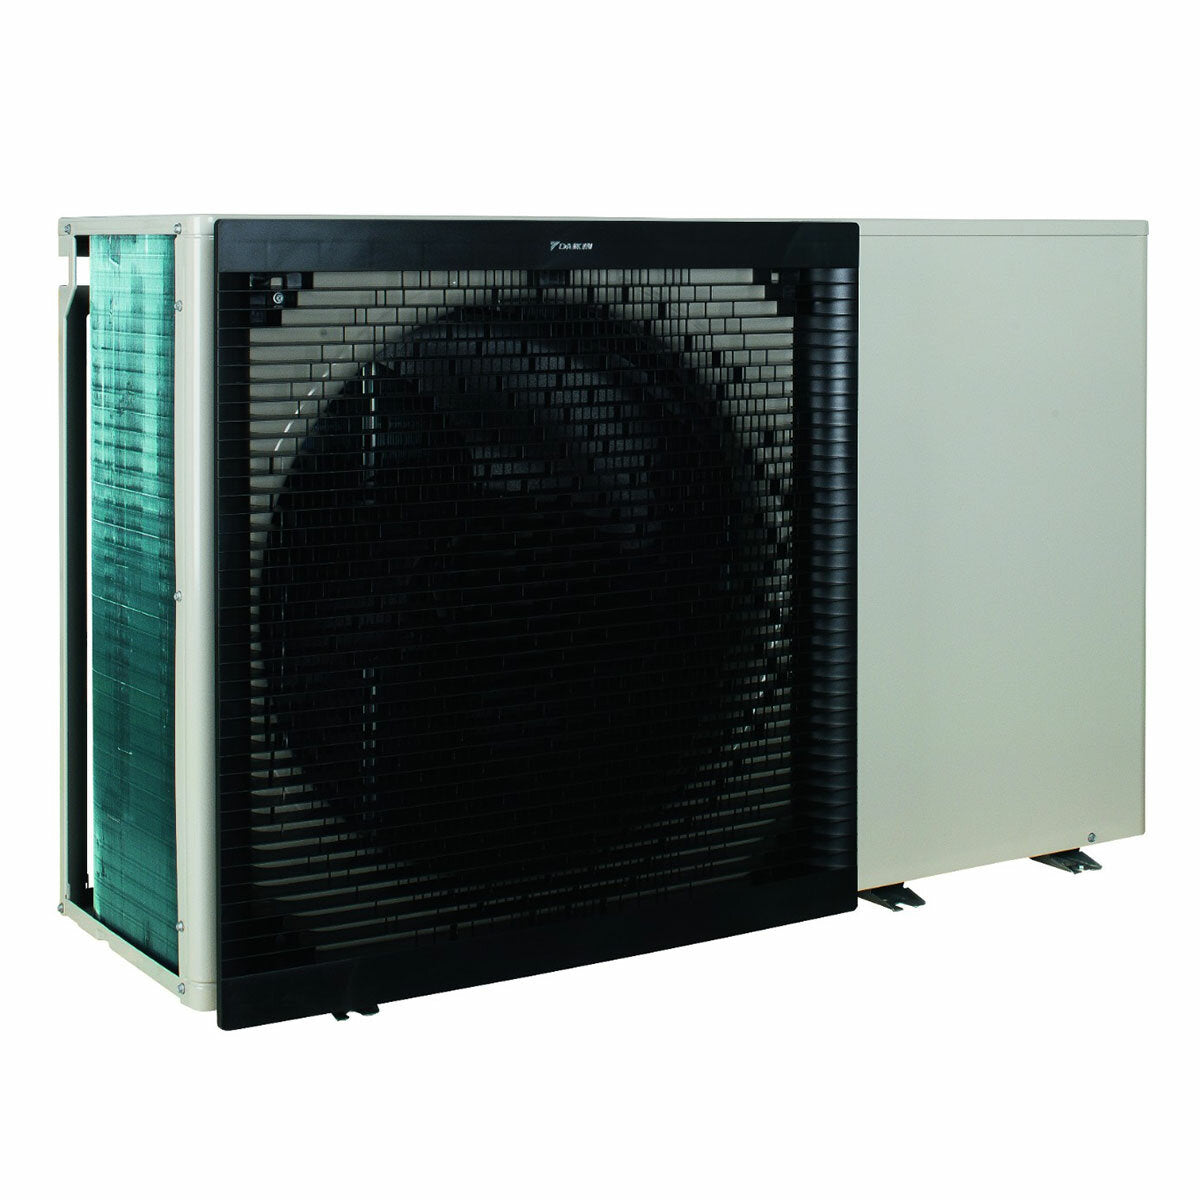 Daikin air/water heat pump 9 kW single-phase power supply with R32 A++ gas hydronic module